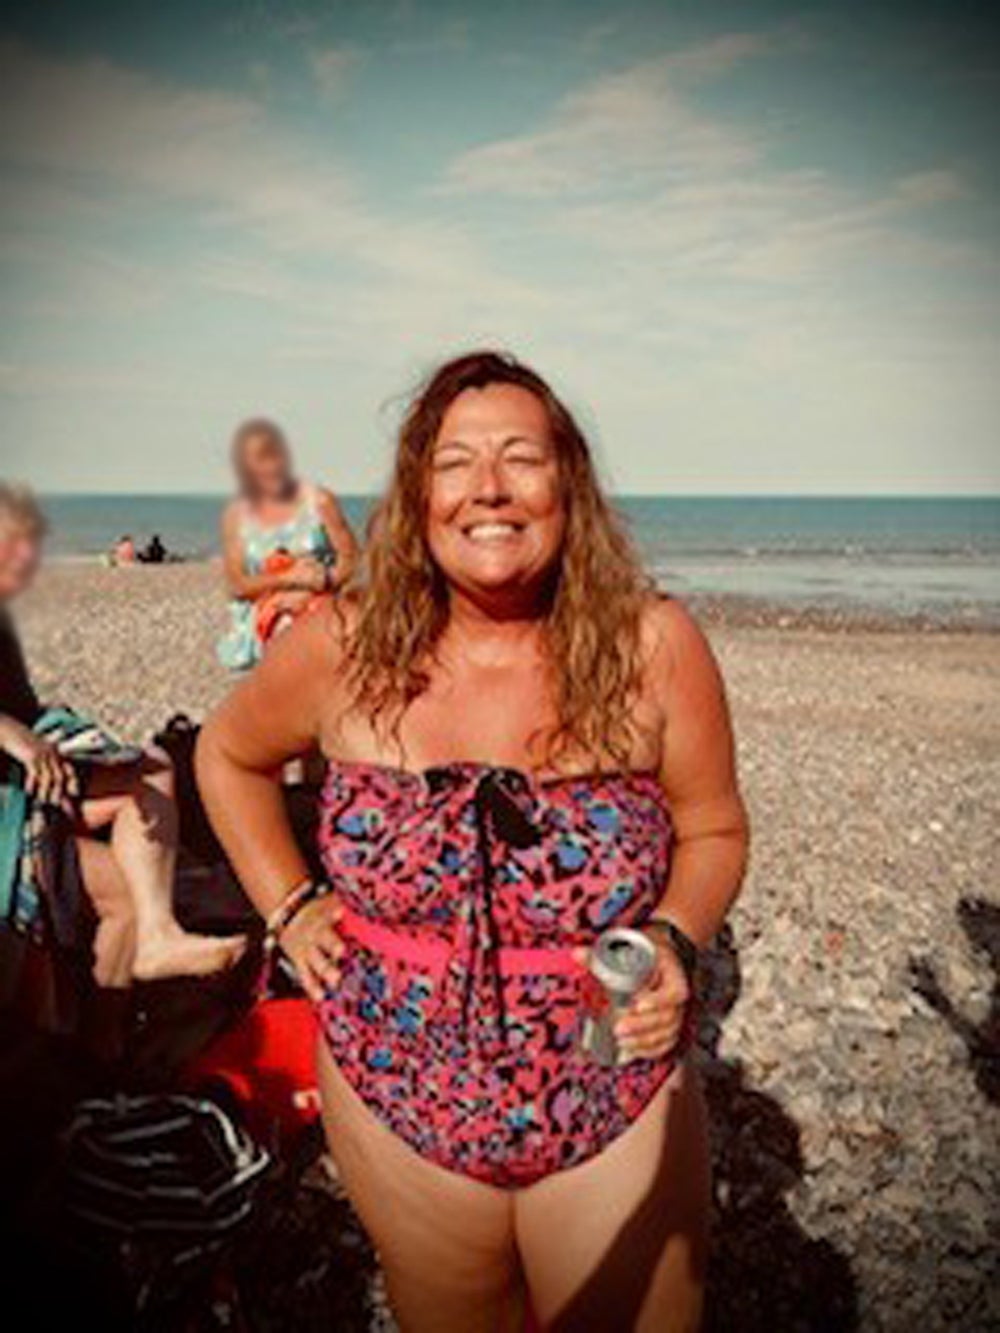 Claire Keable, 48, grinning after a swim in the sea on Hornsea beach (Collect/PA Real Life)